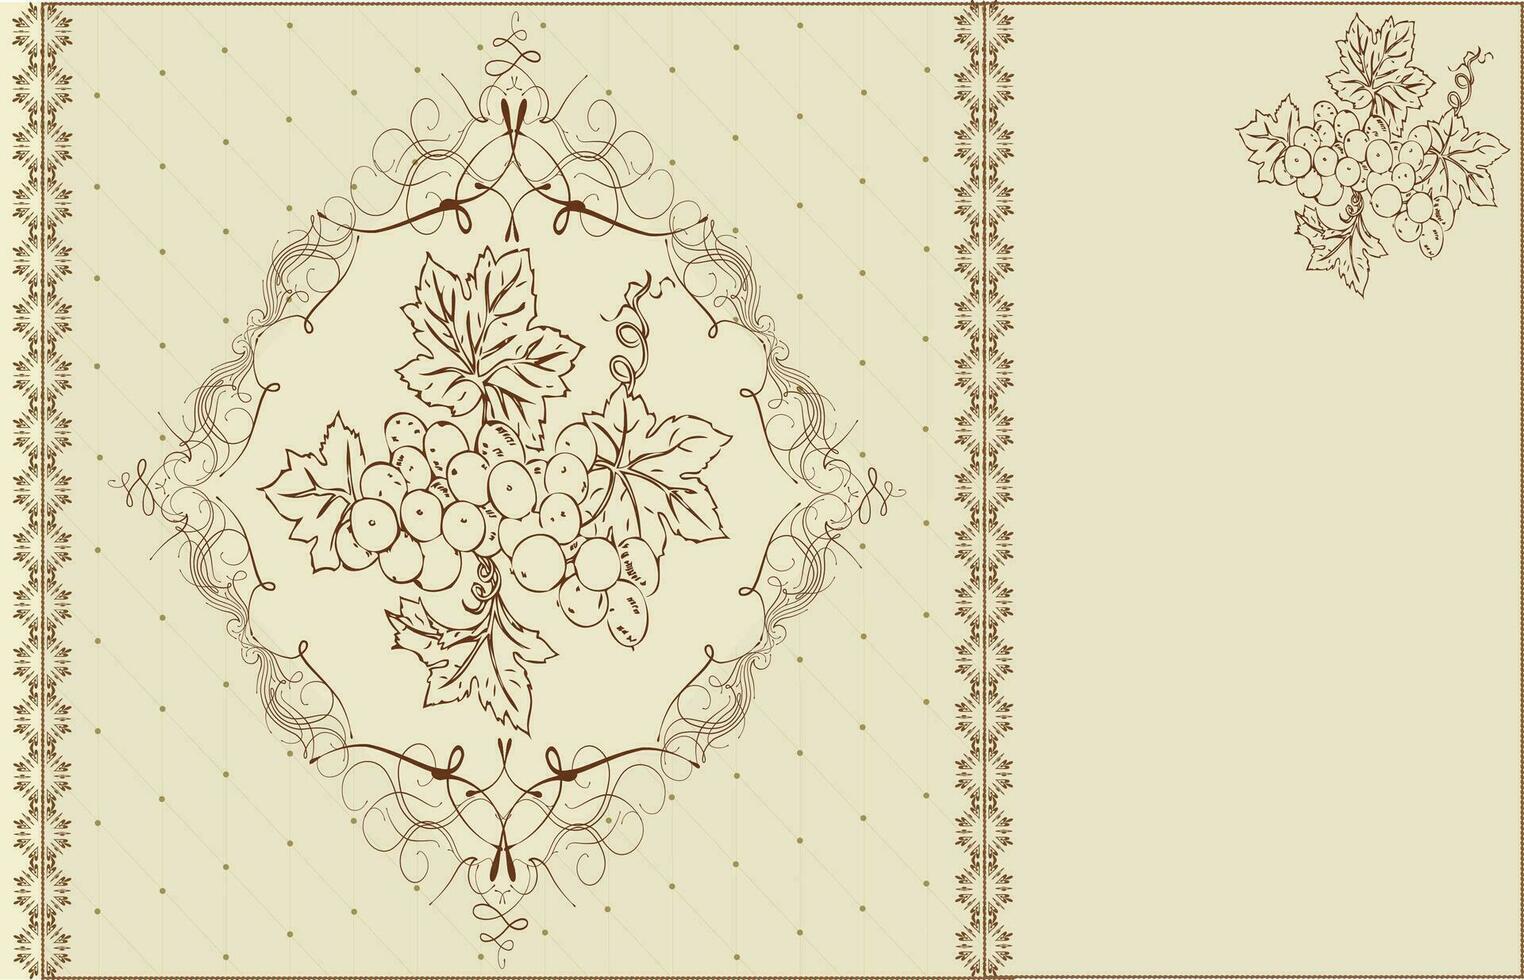 Vintage invitation card with ornate elegant abstract floral grapes design vector